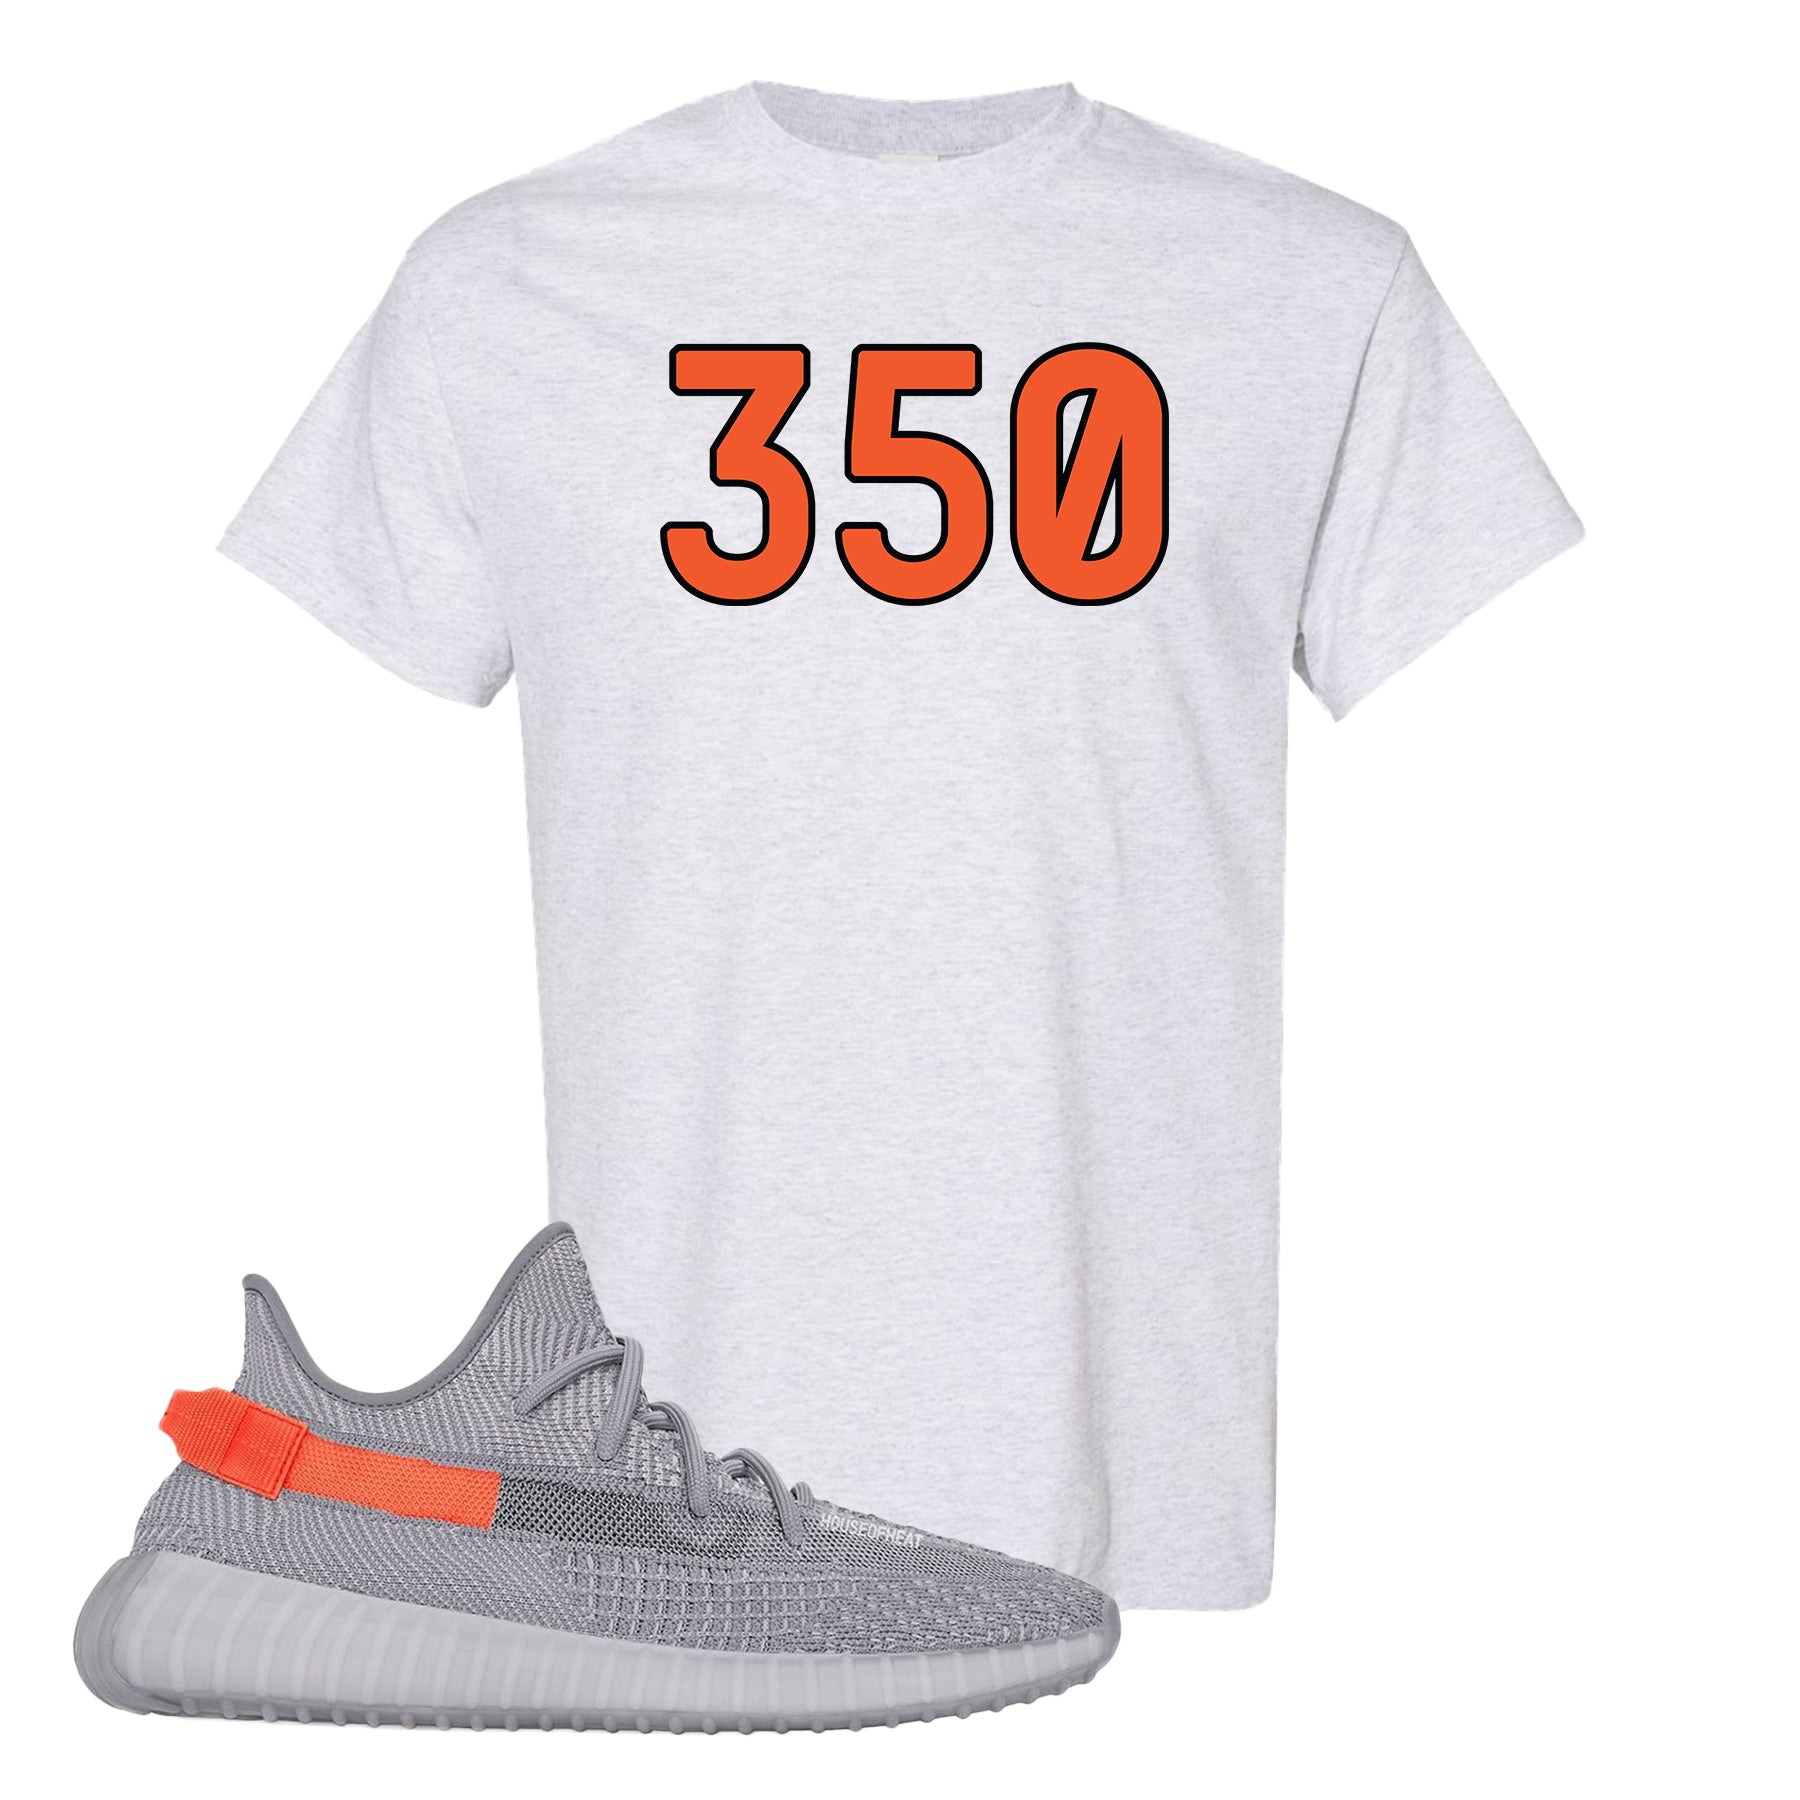 yeezy boost low for sale etsy